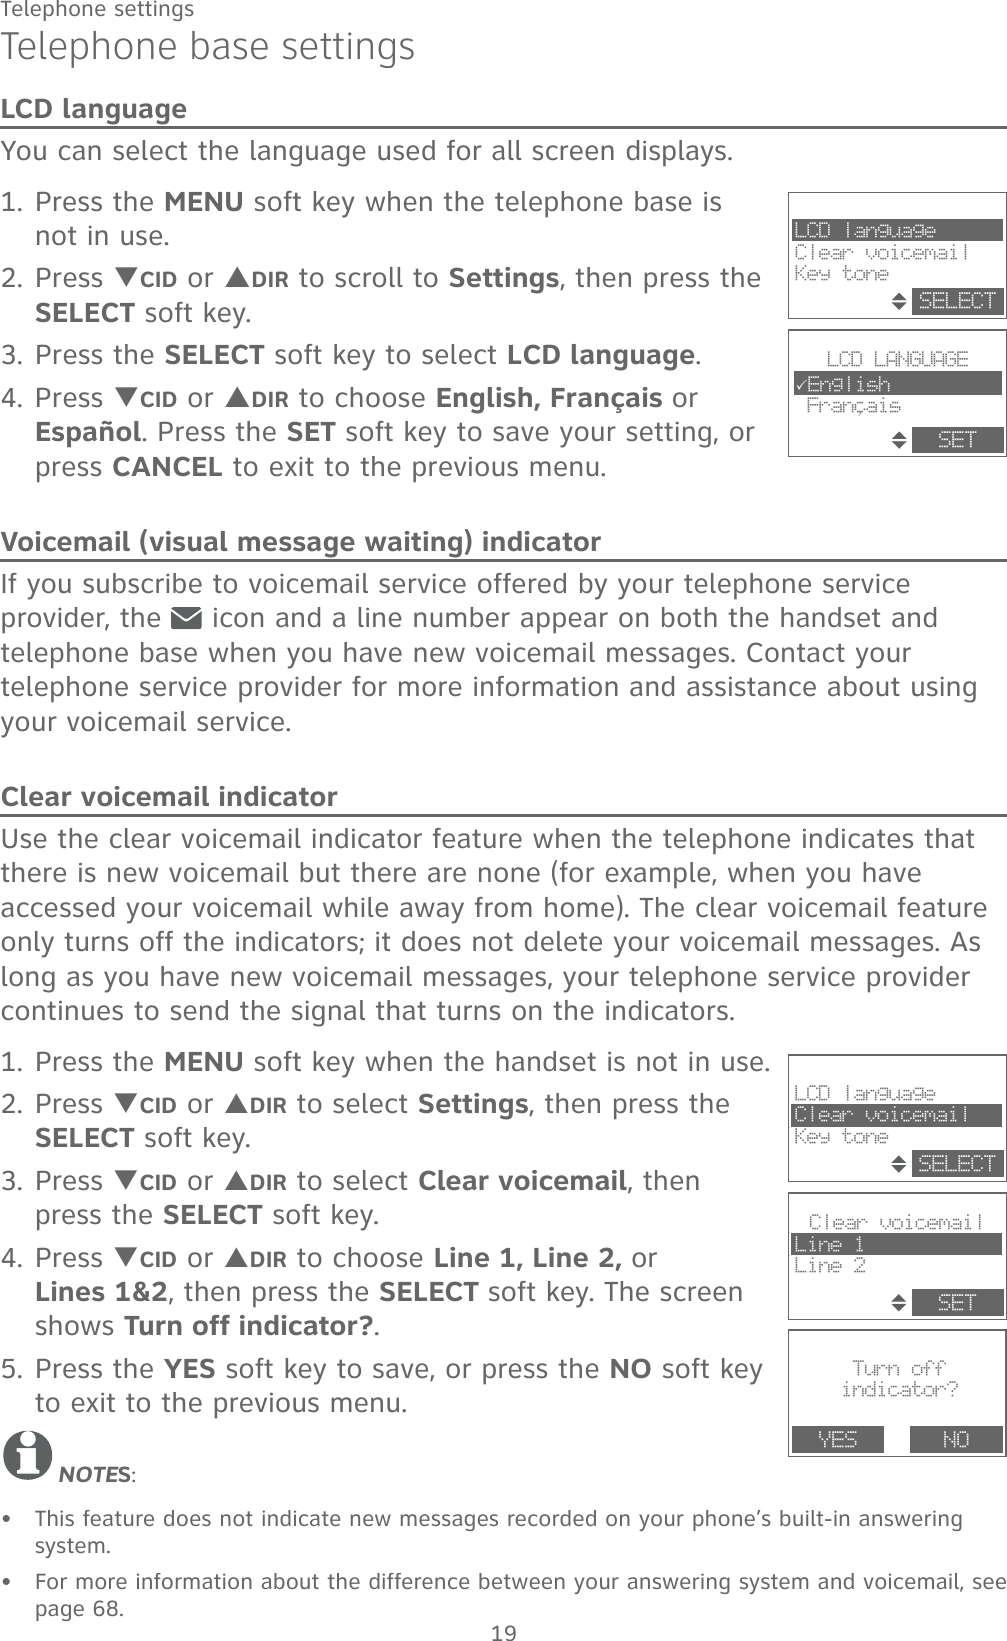 19Telephone settingsTelephone base settingsLCD languageYou can select the language used for all screen displays.1. Press the MENU soft key when the telephone base is not in use.2. Press TCID or SDIR to scroll to Settings, then press the SELECT soft key.3. Press the SELECT soft key to select LCD language.4. Press TCID or SDIR to choose English, Français or Español. Press the SET soft key to save your setting, or press CANCEL to exit to the previous menu.Voicemail (visual message waiting) indicatorIf you subscribe to voicemail service offered by your telephone service provider, the   icon and a line number appear on both the handset and telephone base when you have new voicemail messages. Contact your telephone service provider for more information and assistance about using your voicemail service. Clear voicemail indicatorUse the clear voicemail indicator feature when the telephone indicates that there is new voicemail but there are none (for example, when you have accessed your voicemail while away from home). The clear voicemail feature only turns off the indicators; it does not delete your voicemail messages. As long as you have new voicemail messages, your telephone service provider continues to send the signal that turns on the indicators.1. Press the MENU soft key when the handset is not in use.2. Press TCID or SDIR to select Settings, then press the SELECT soft key.3. Press TCID or SDIR to select Clear voicemail, then press the SELECT soft key.4. Press TCID or SDIR to choose Line 1, Line 2, or      Lines 1&amp;2, then press the SELECT soft key. The screen shows Turn off indicator?.5. Press the YES soft key to save, or press the NO soft key to exit to the previous menu.NOTES:This feature does not indicate new messages recorded on your phone’s built-in answering system.For more information about the difference between your answering system and voicemail, see page 68.••Turn offindicator?YES NOClear voicemailLine 1Line 2SETLCD languageClear voicemailKey toneSELECT,LCD LANGUAGE3English FrancaisSETLCD languageClear voicemailKey toneSELECT